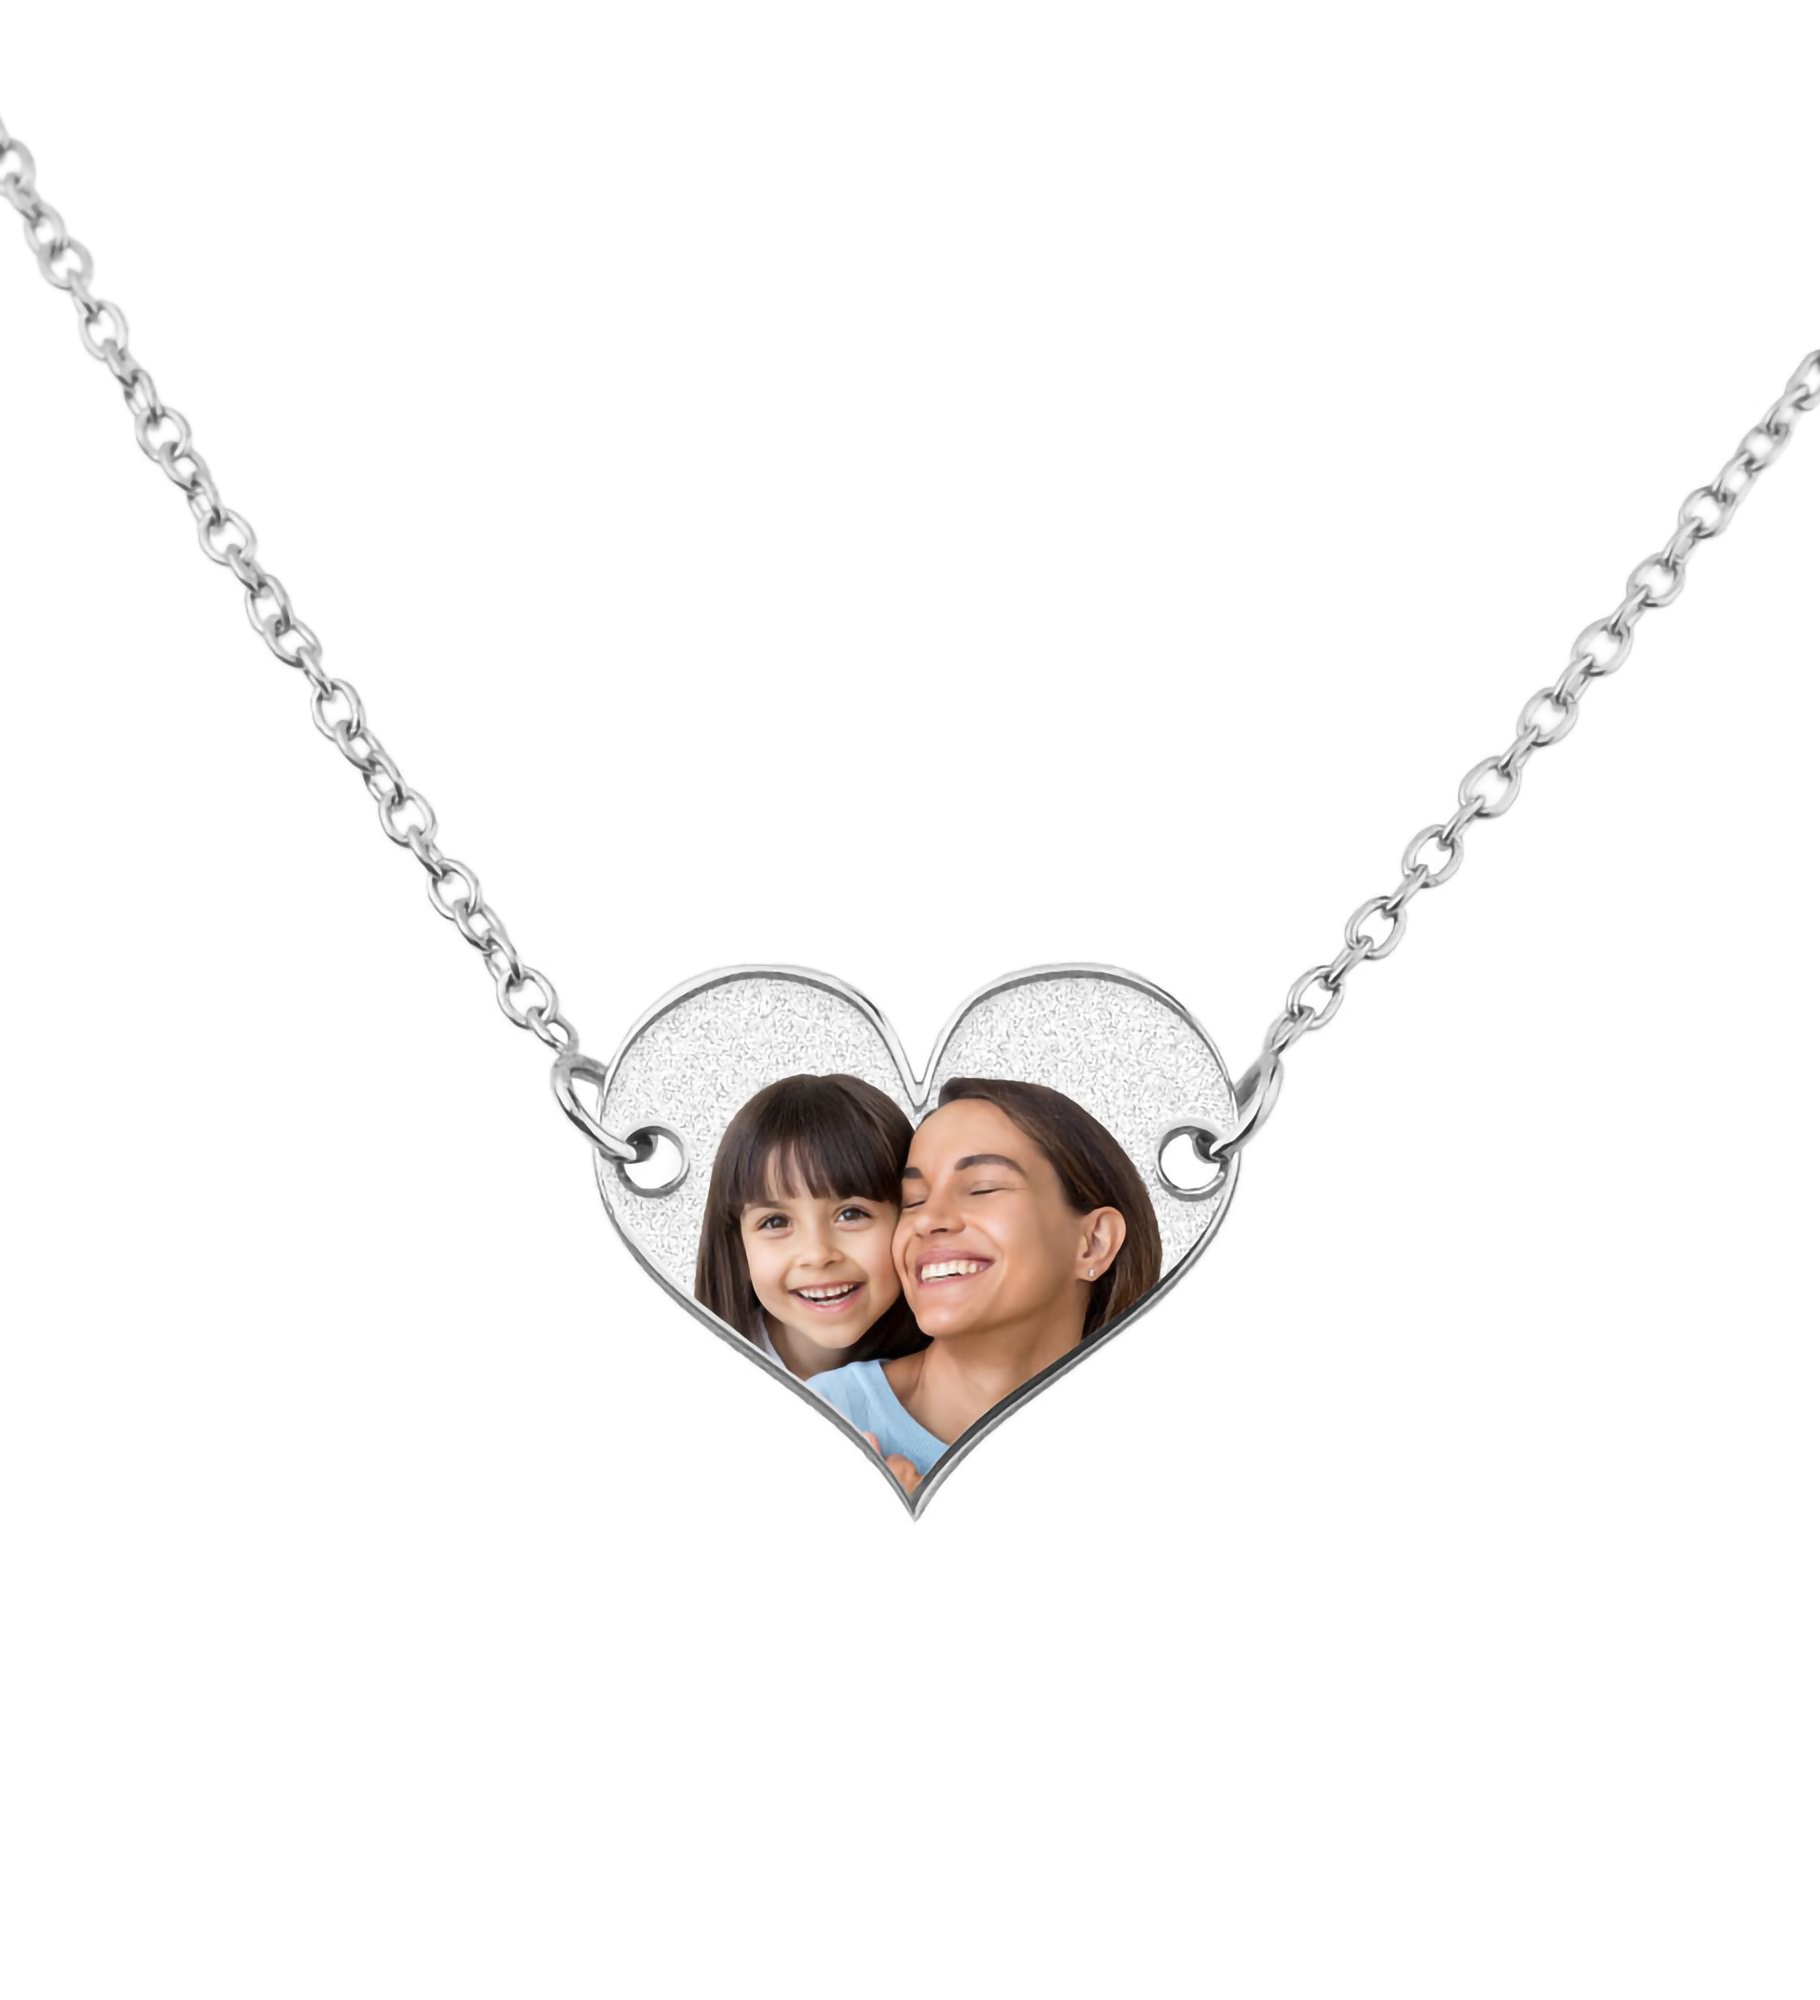 Personalized Heart Shaped Photo Necklace